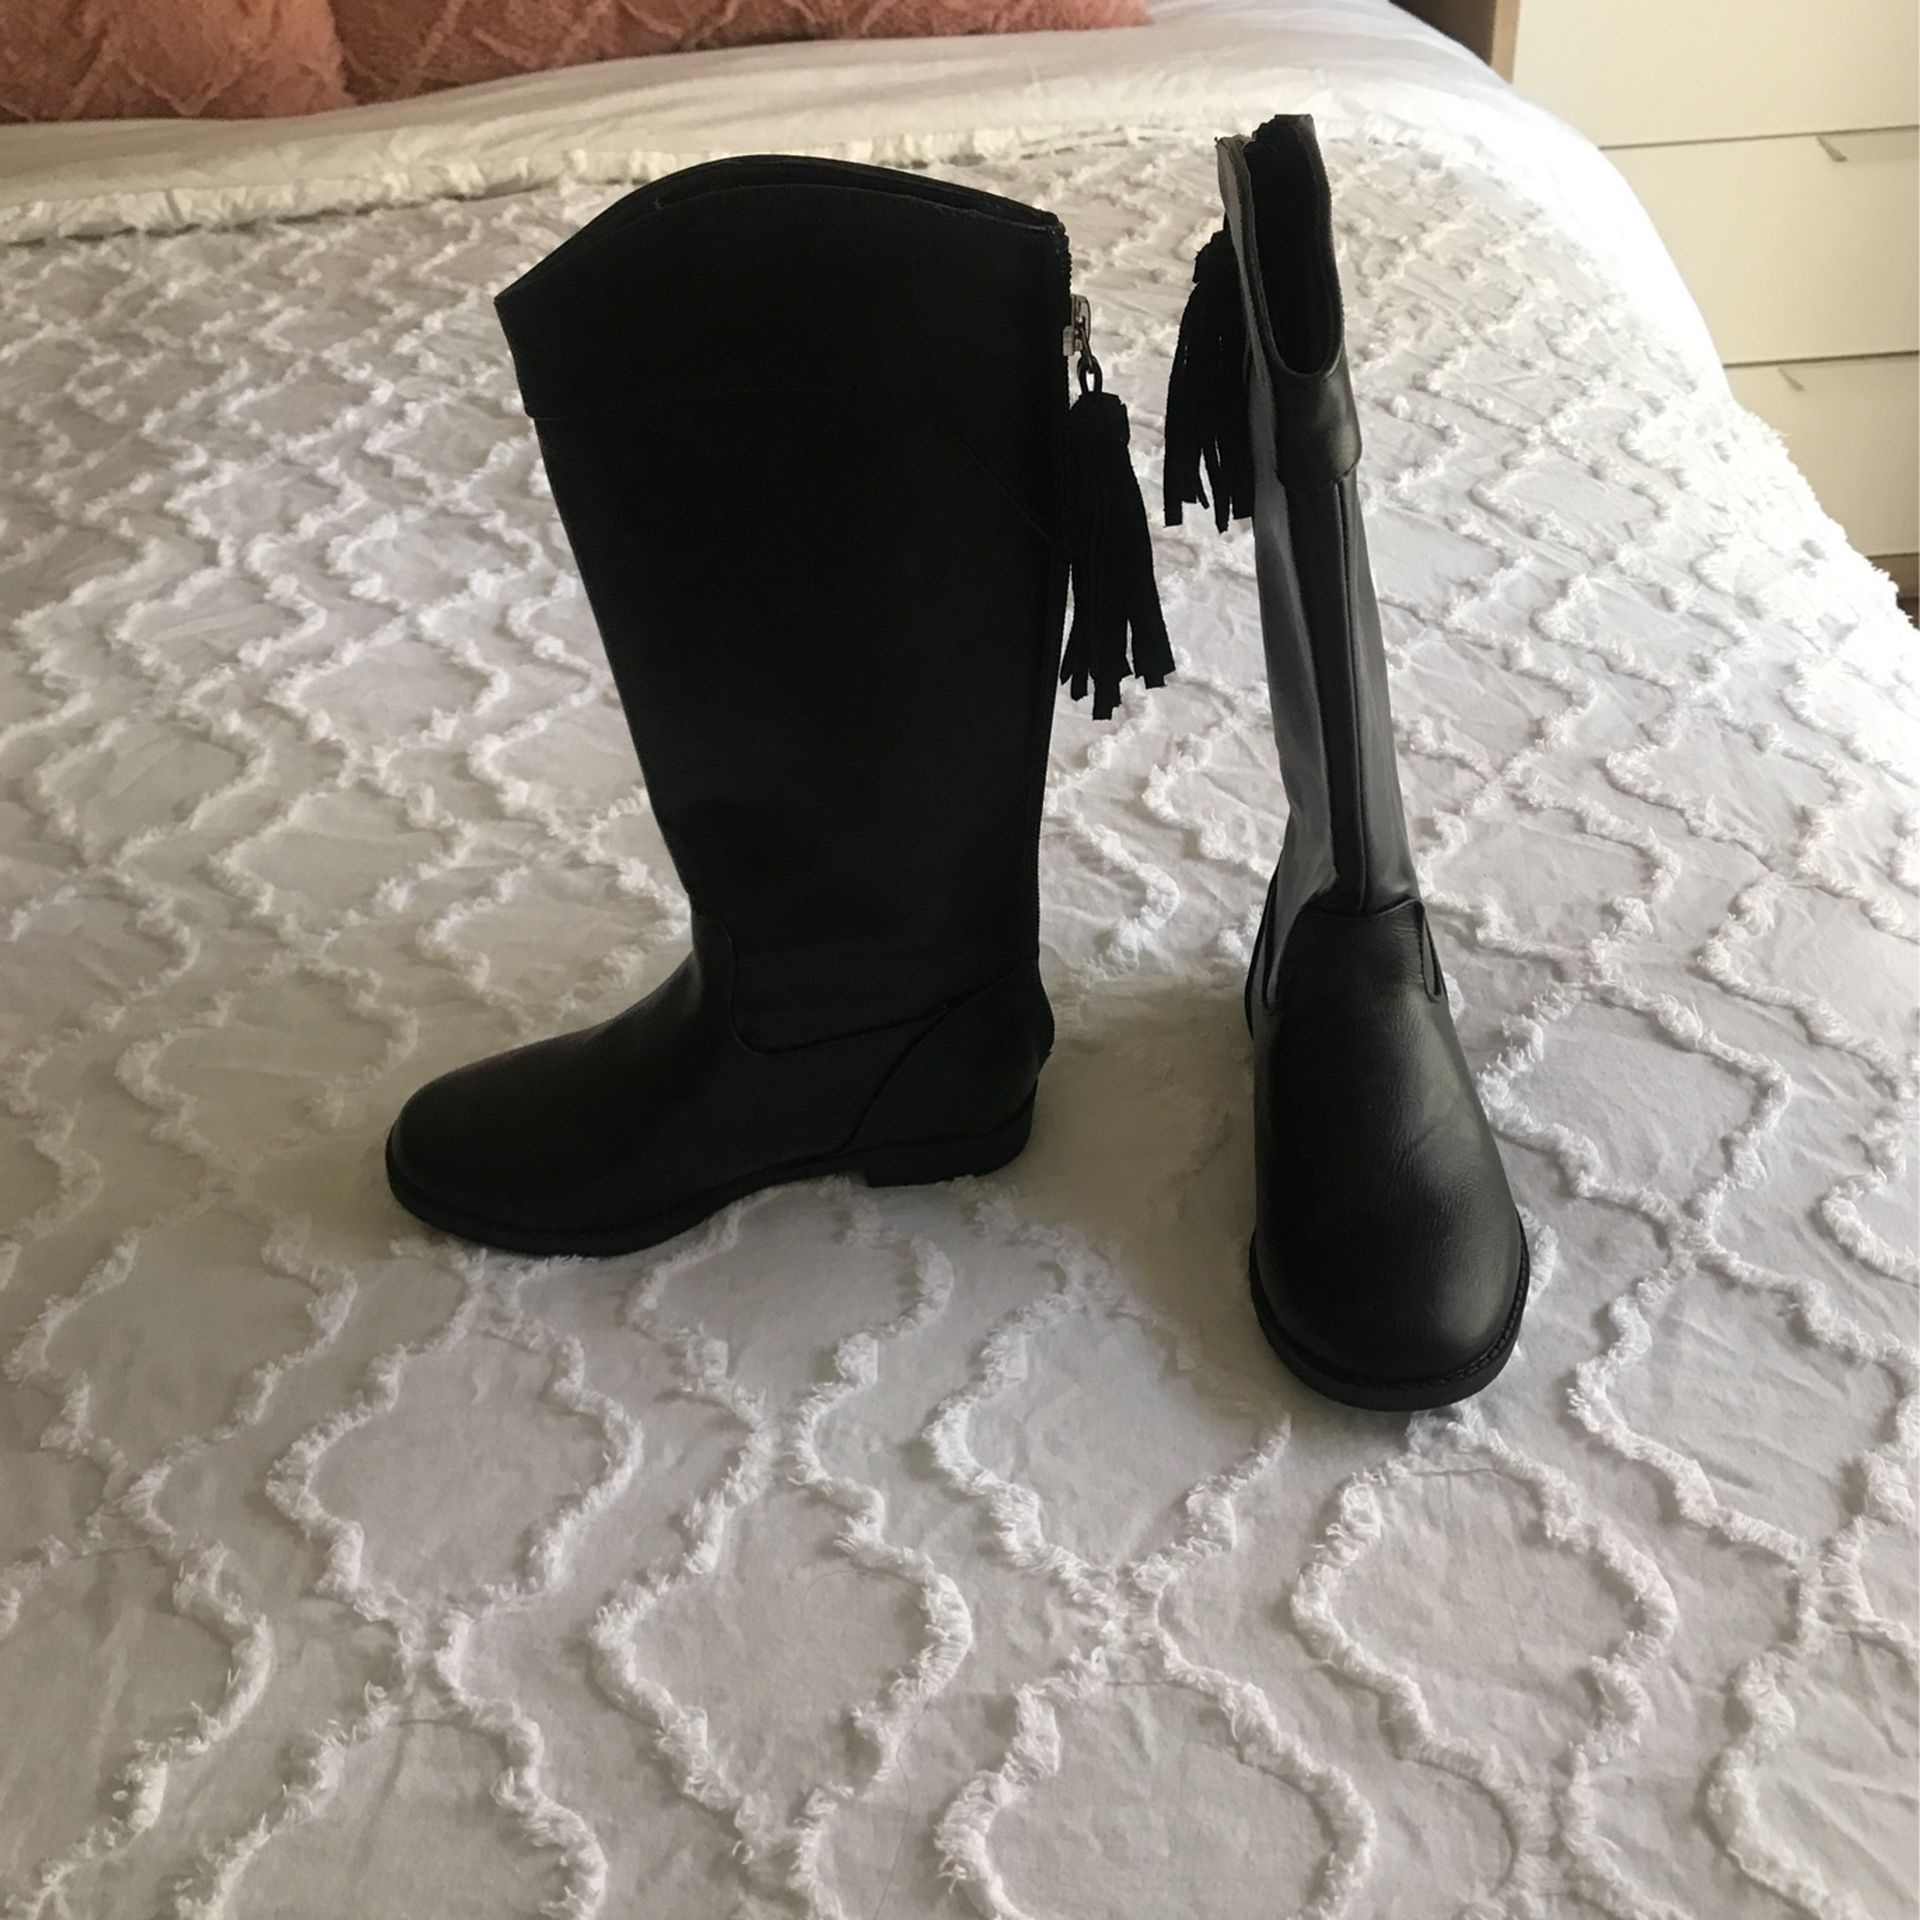 New Girls Boots Size 11